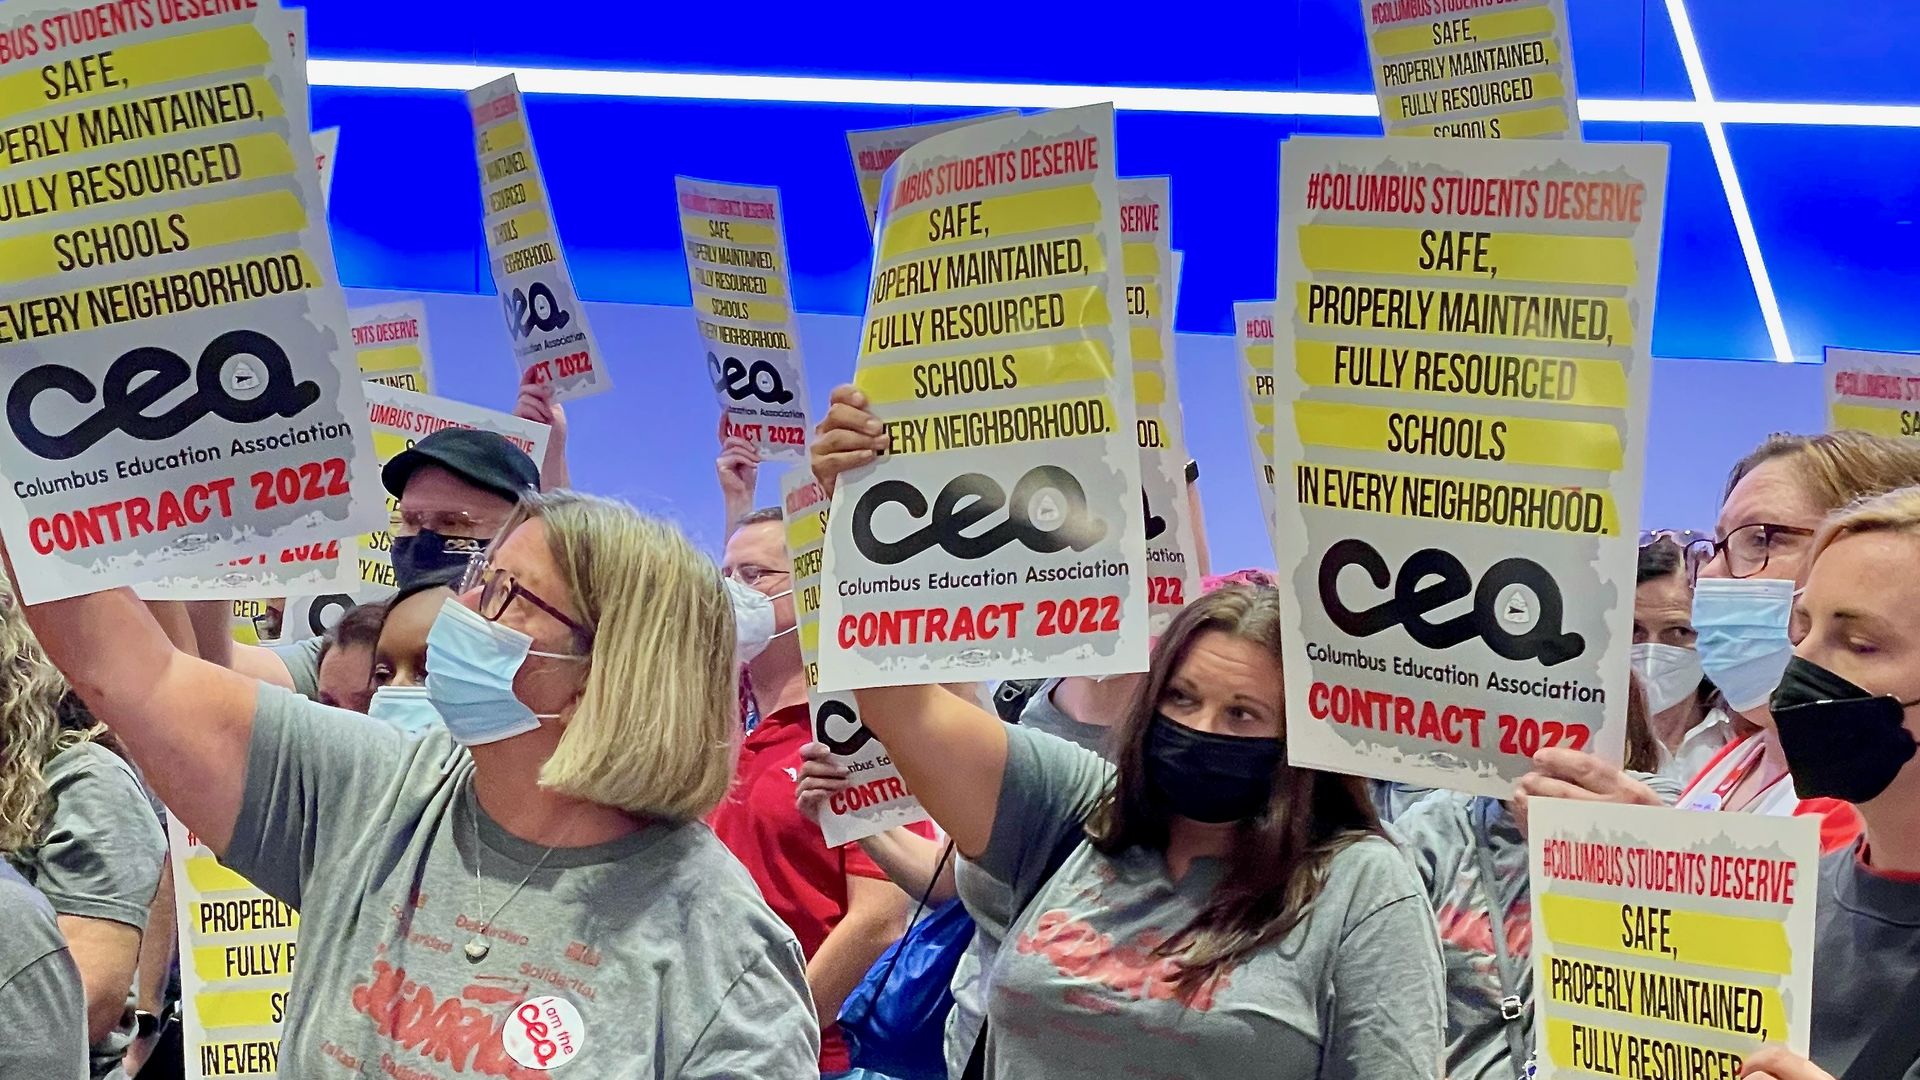 Teachers hold signs  that say "Columbus students deserve safe, properly maintained, fully resourced schools in every neighborhood. Columbus Education Association contract 2022"